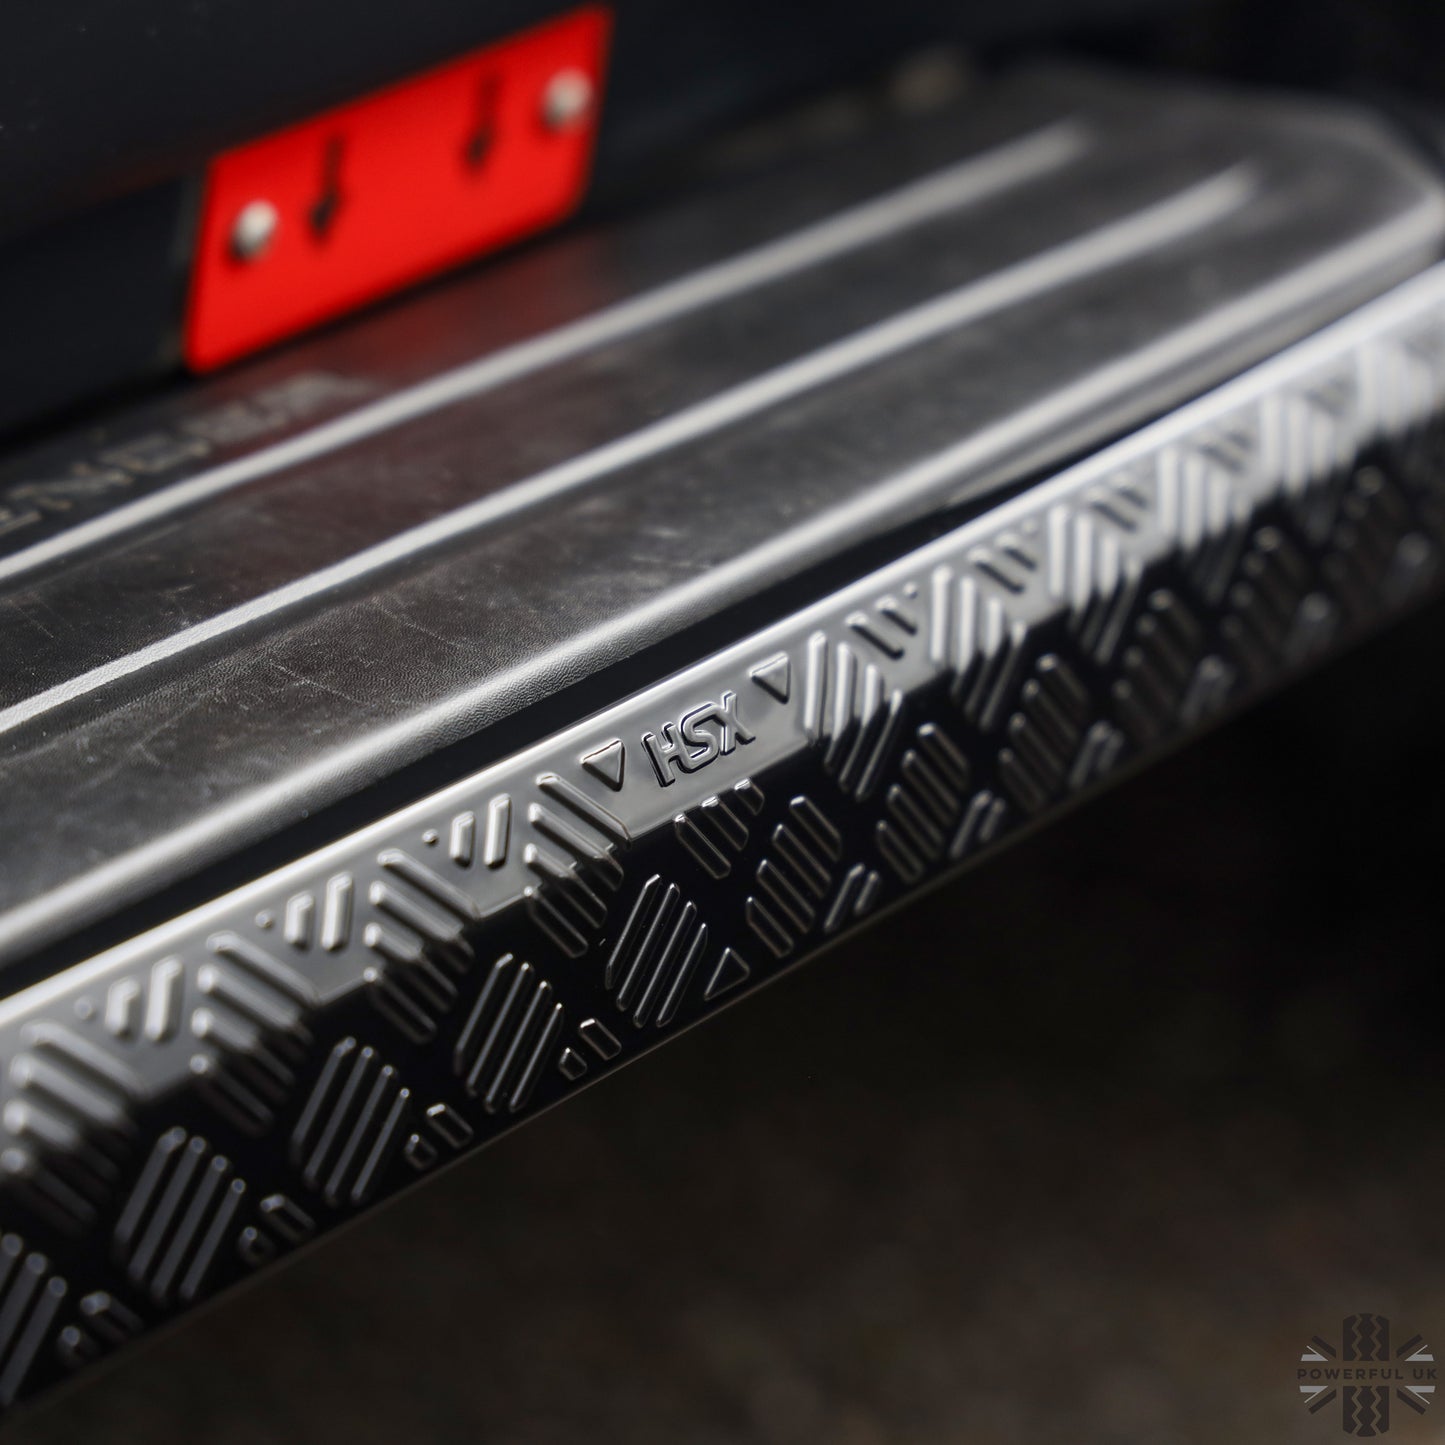 4x Chequer Plate Side Step Covers for Land Rover Defender L663 (110&130) - Gloss Black